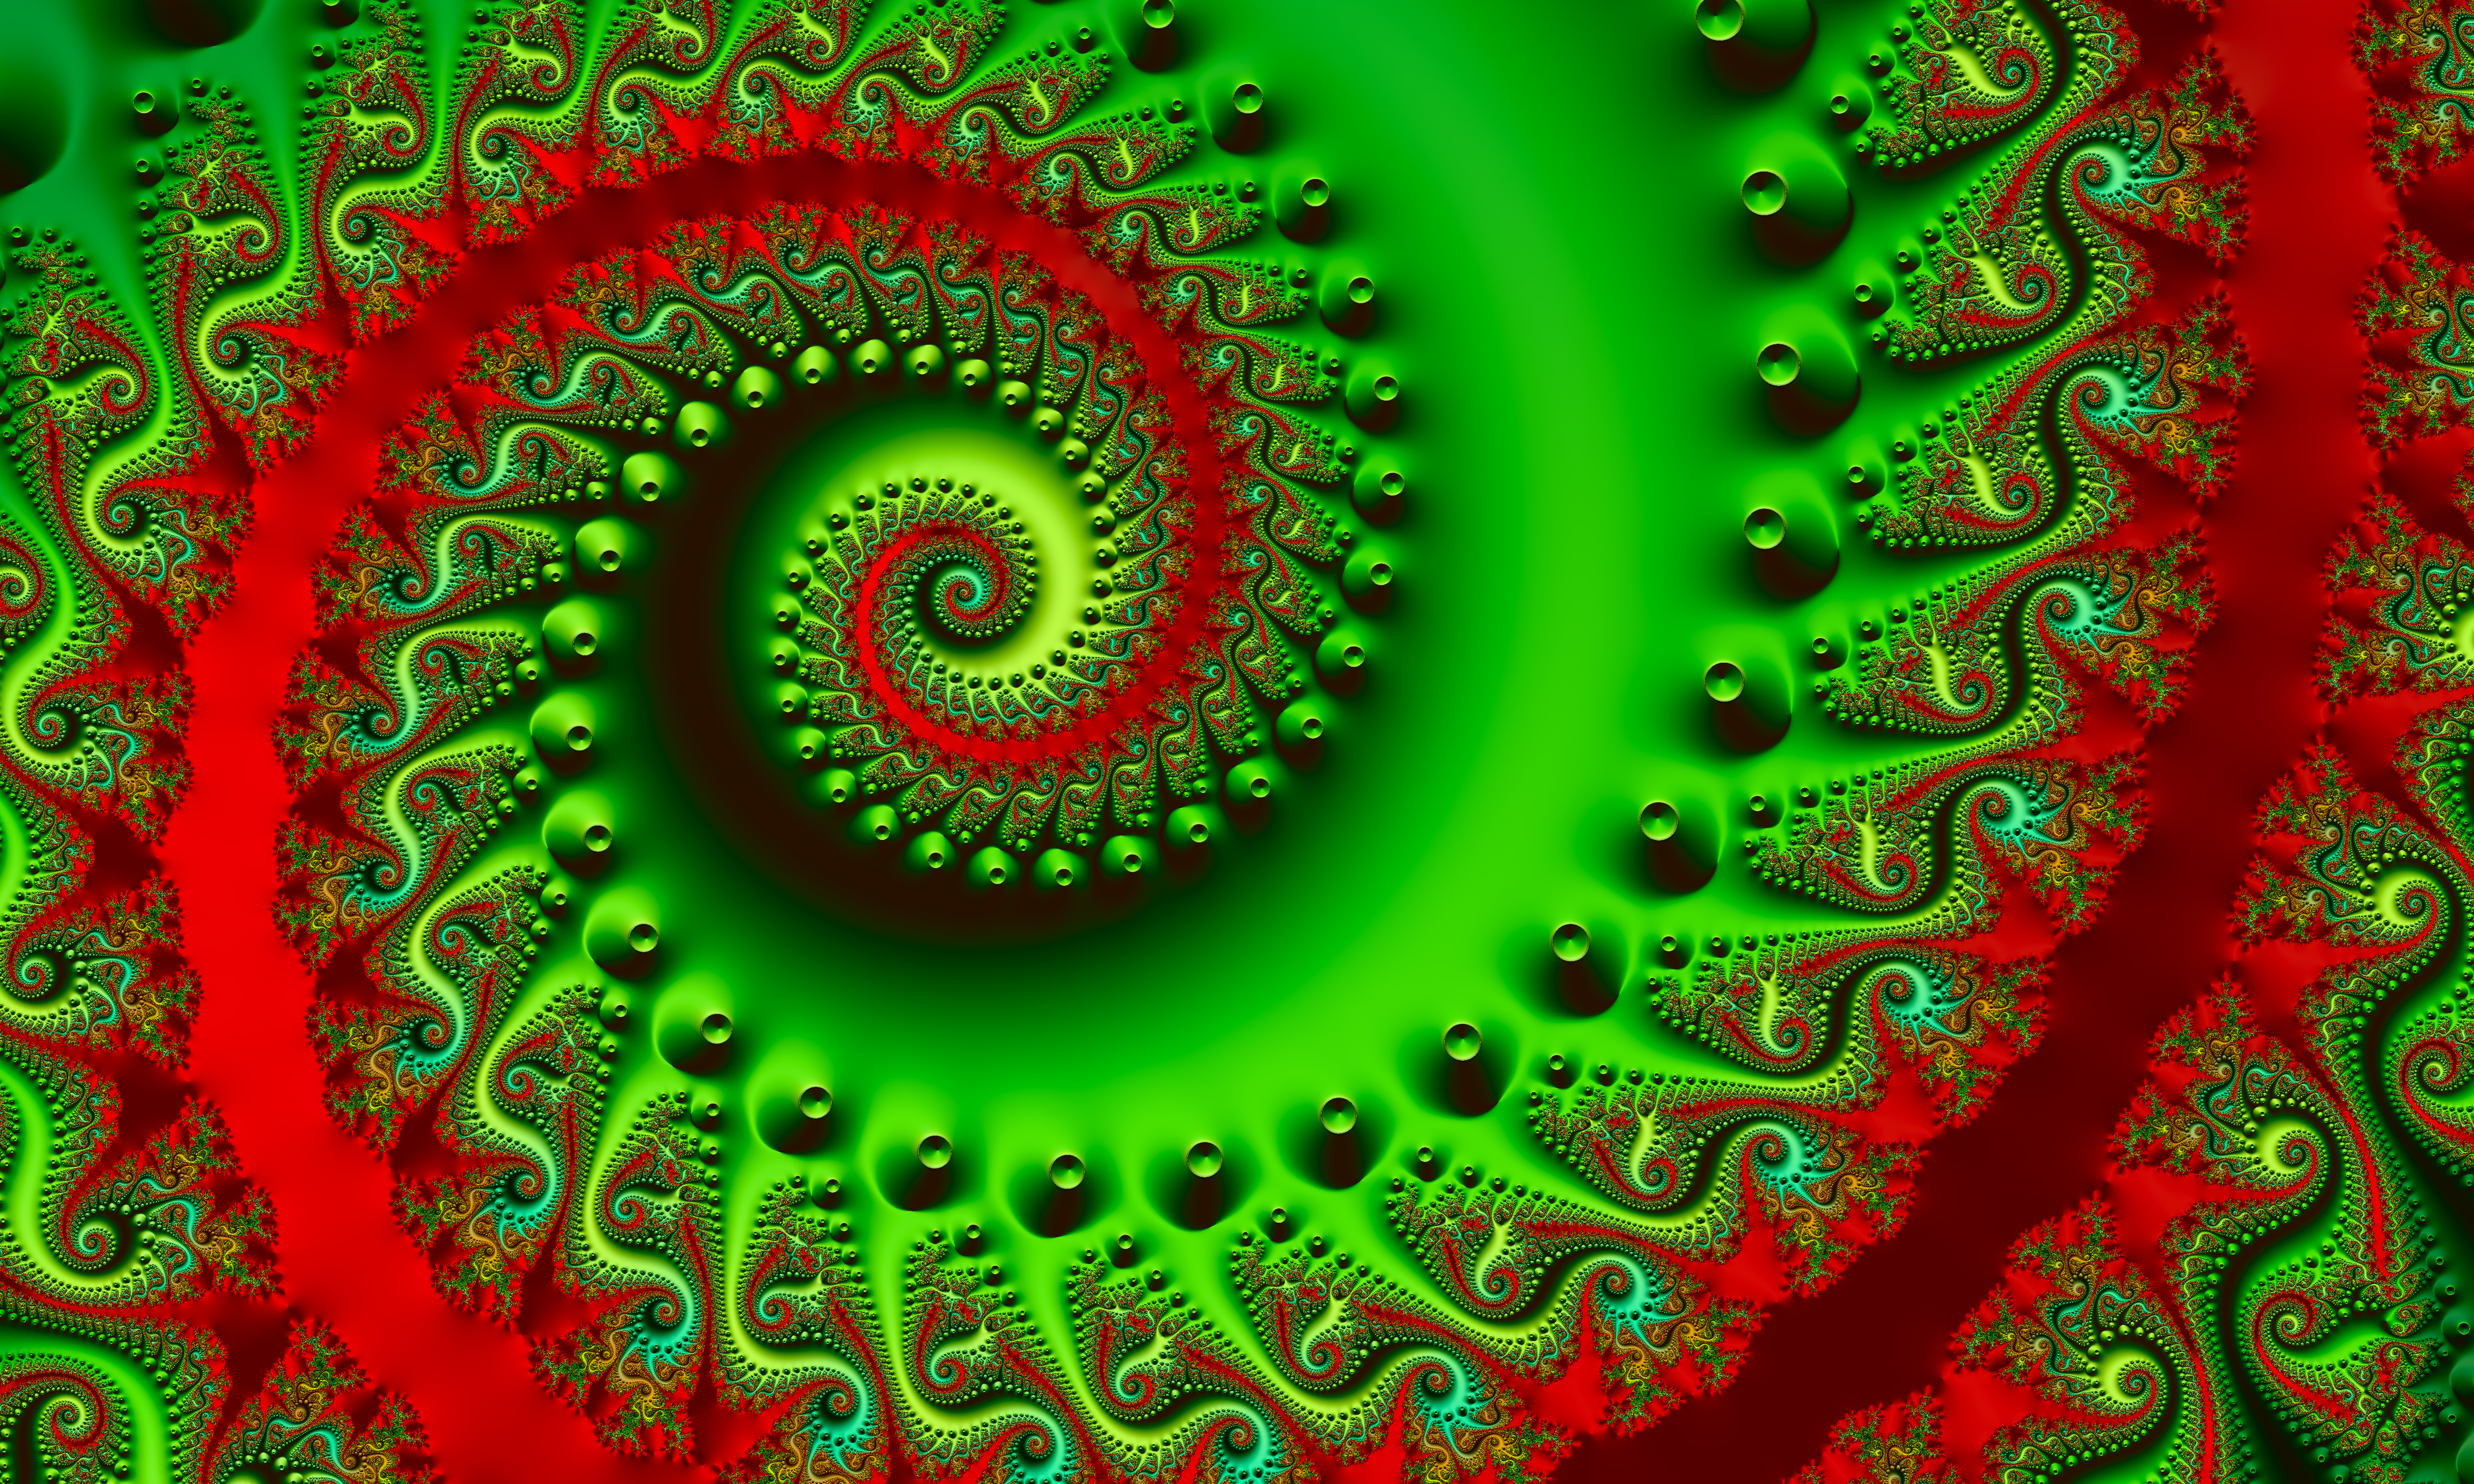 3d, spiral, bright, motley, multicolored, fractal, swirling, involute